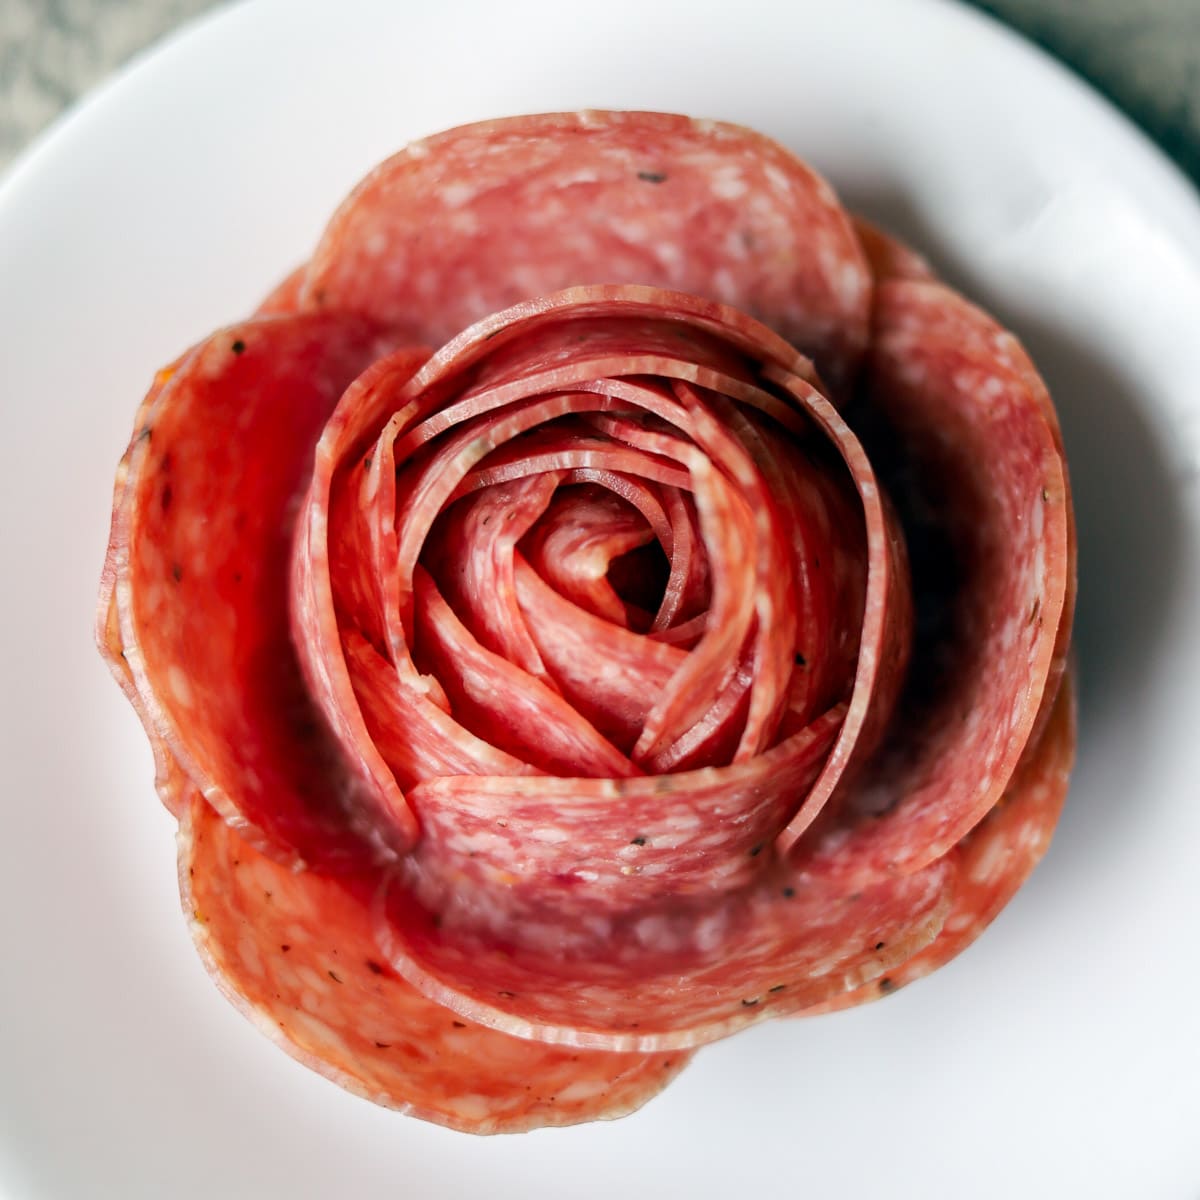 How to Make A Salami Rose For a Charcuterie Board | Hilda's Kitchen Blog